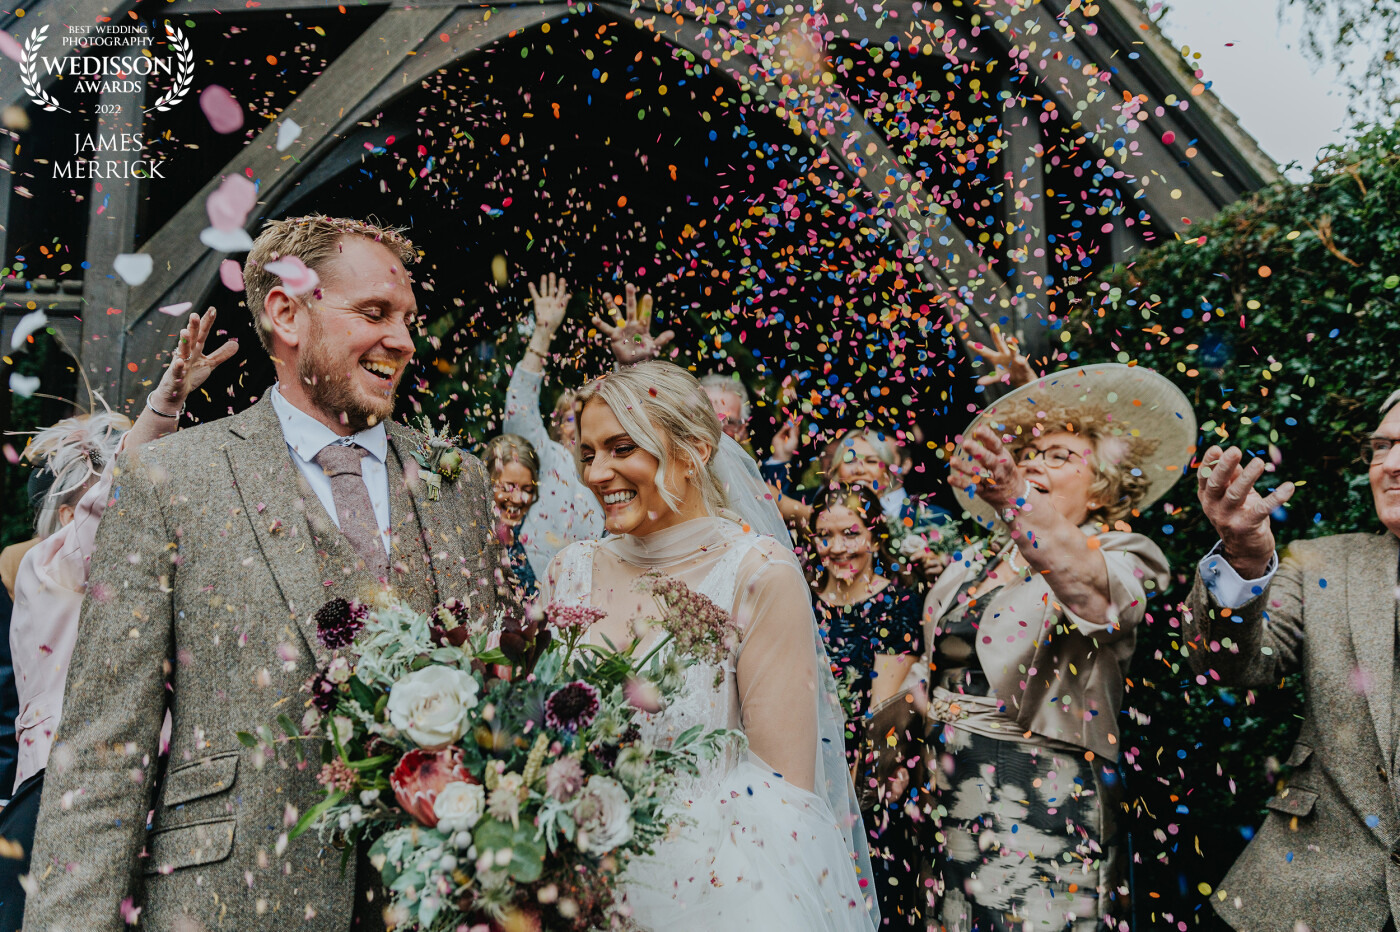 The bigger the confetti shot the better! and Meg & Rob had bucket loads full of colour! I always love guest reactions on these types of shot, the happiness and joy always shines through.